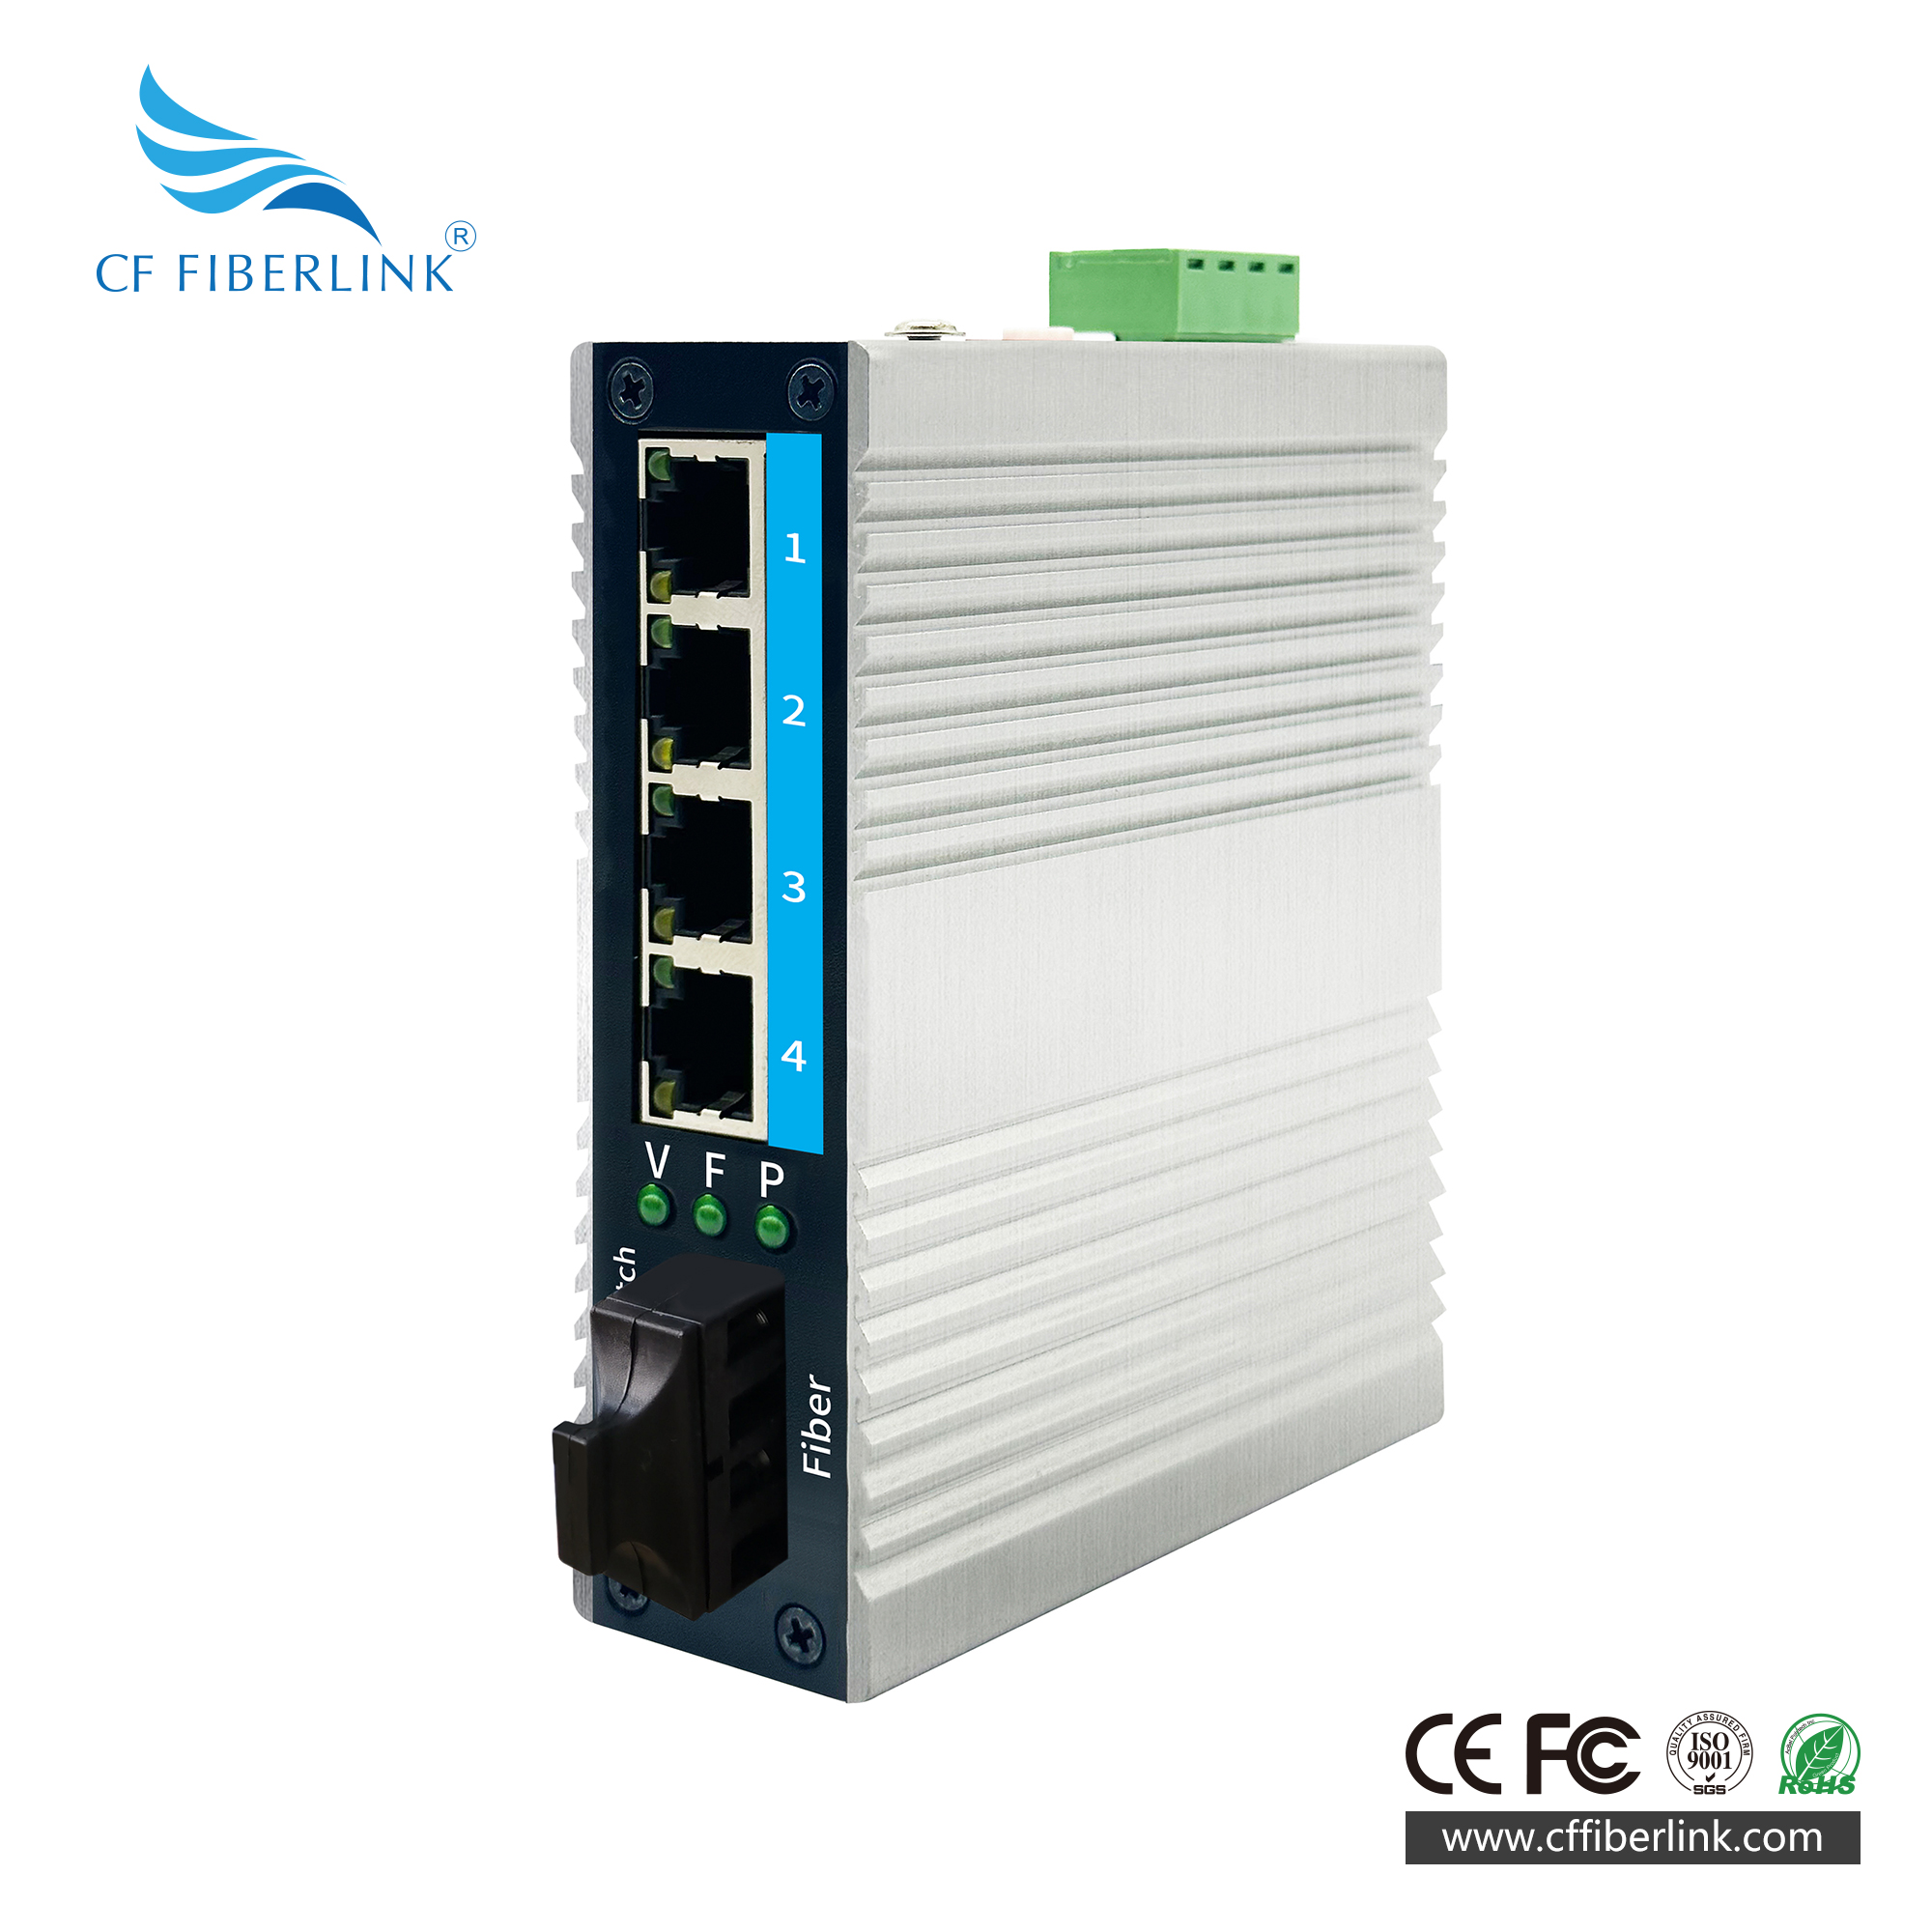 5-port 10/100M/1000M Industrial Ethernet Switch